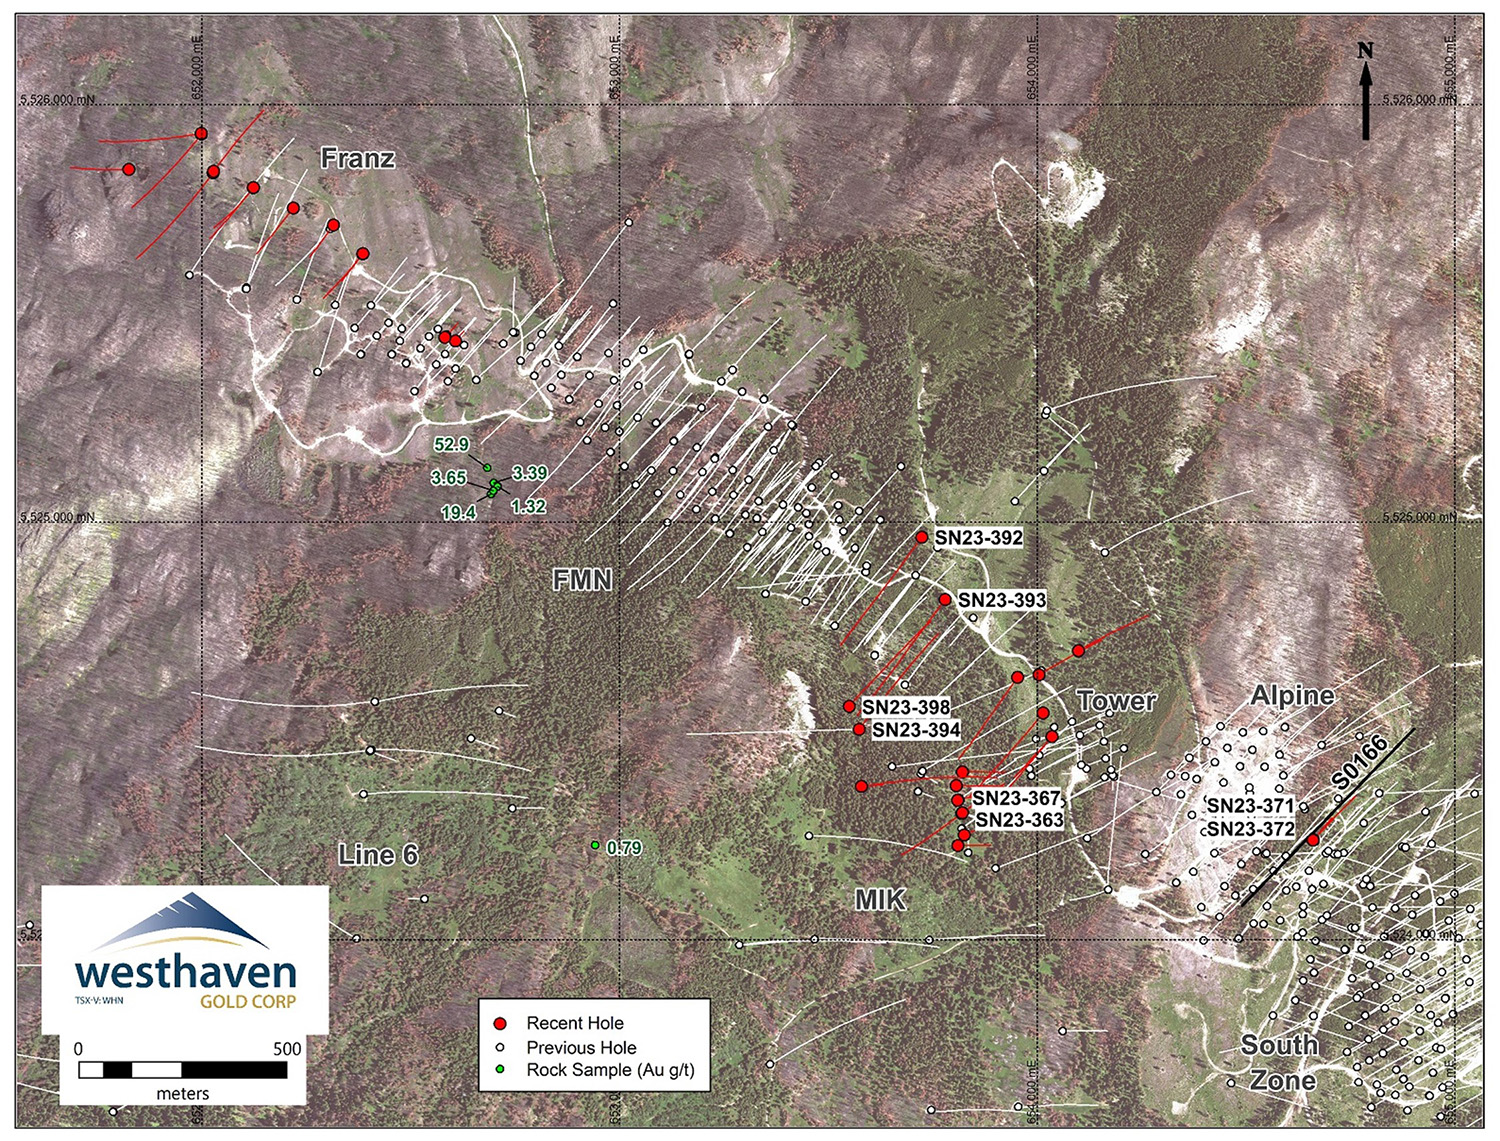 Plan Map of Recent Drilling